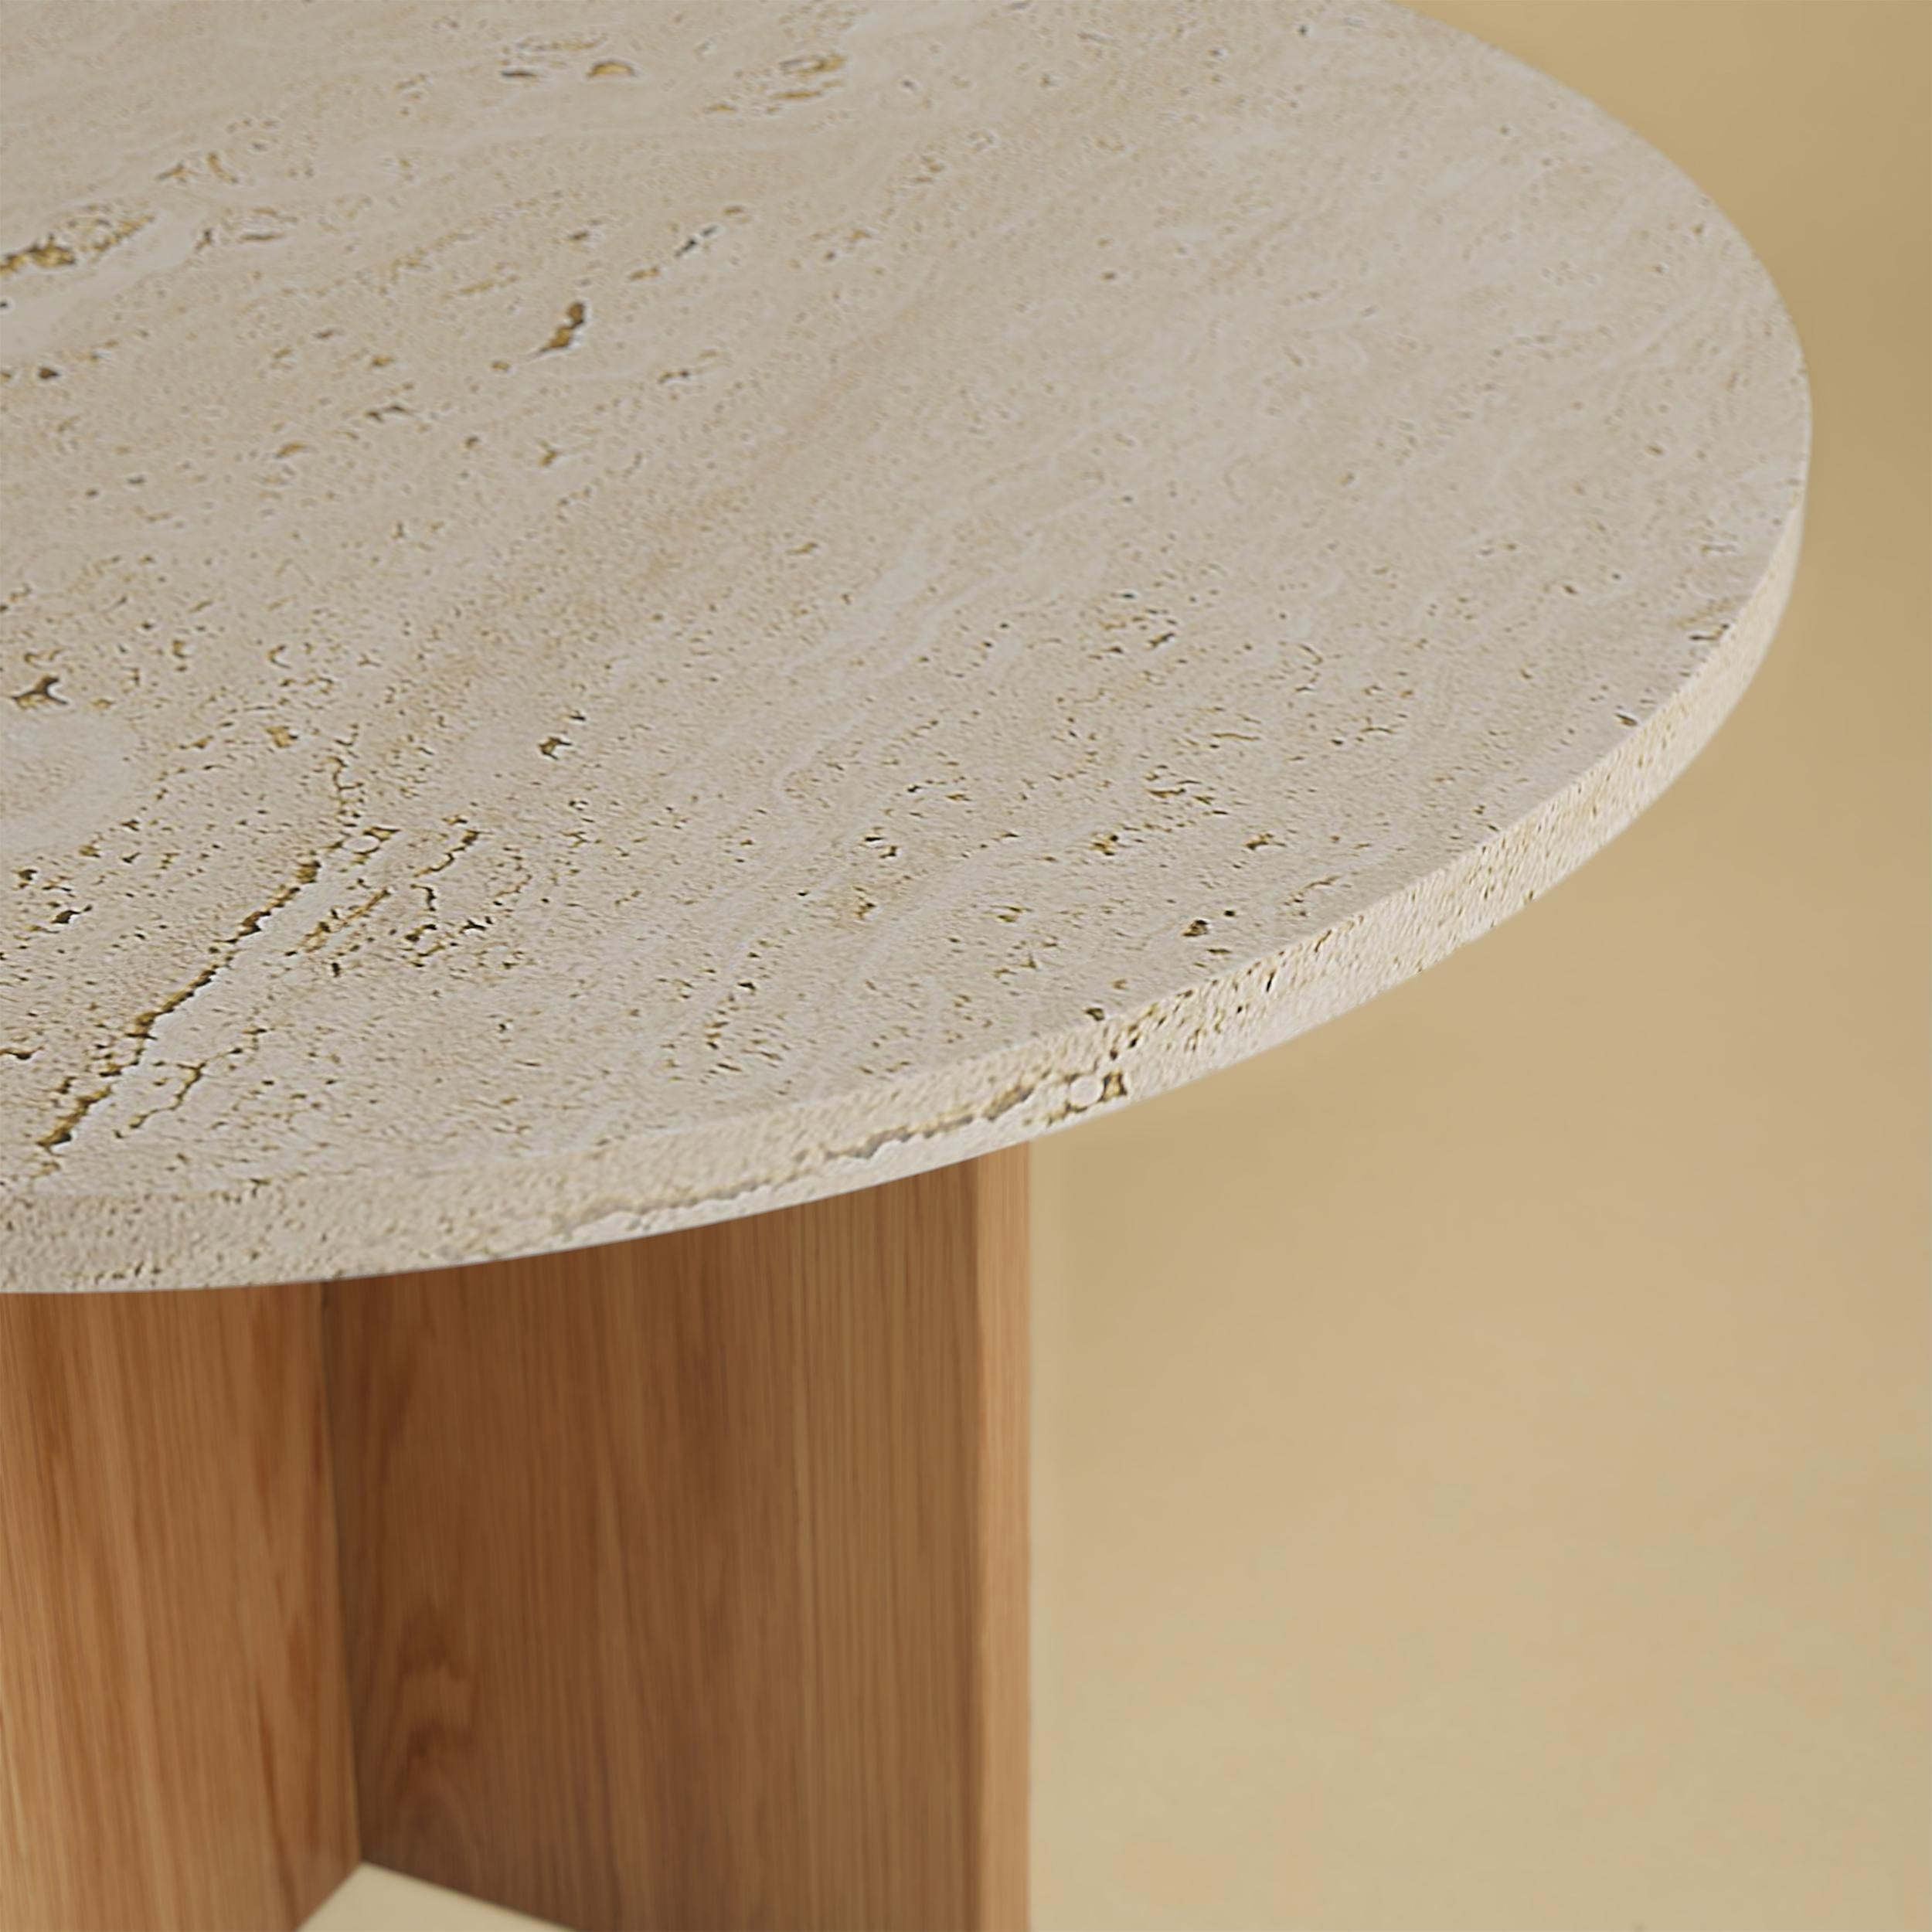 The Tinian coffee table is produced with an oak wood base and Roman travertine top. The top is circular and 60cm in diameter, while the base is obtained by gluing oak planks perpendicular to each other.
Artisanal production made of technological